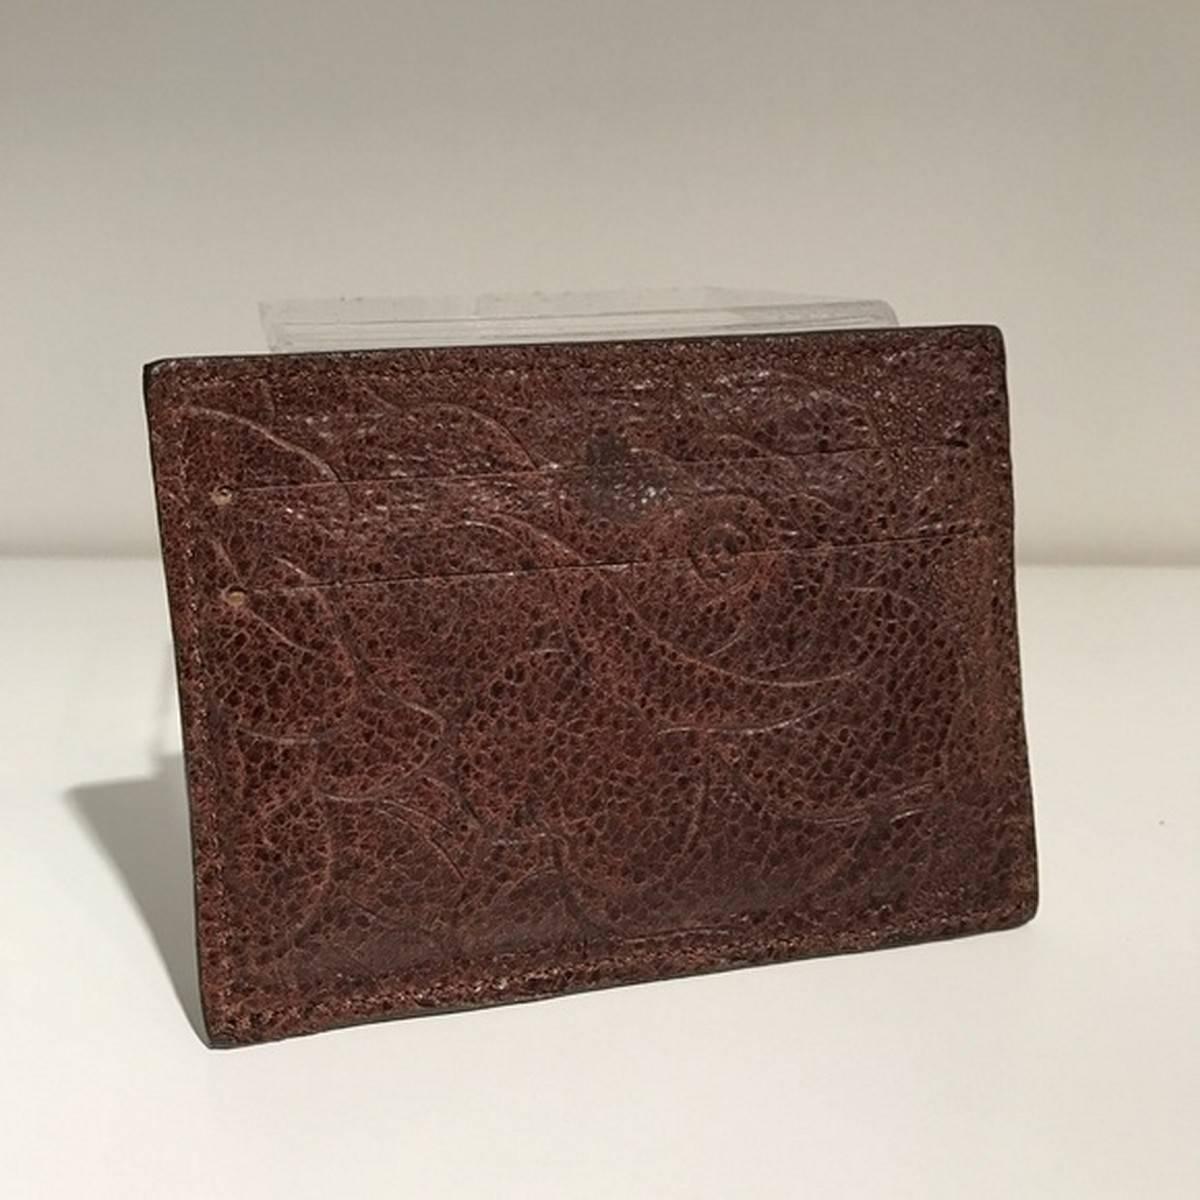 Roberto Cavalli Floral Leather Cardholder, Brown

Brand new.
Leather.
Slim design.
Made in Italy.